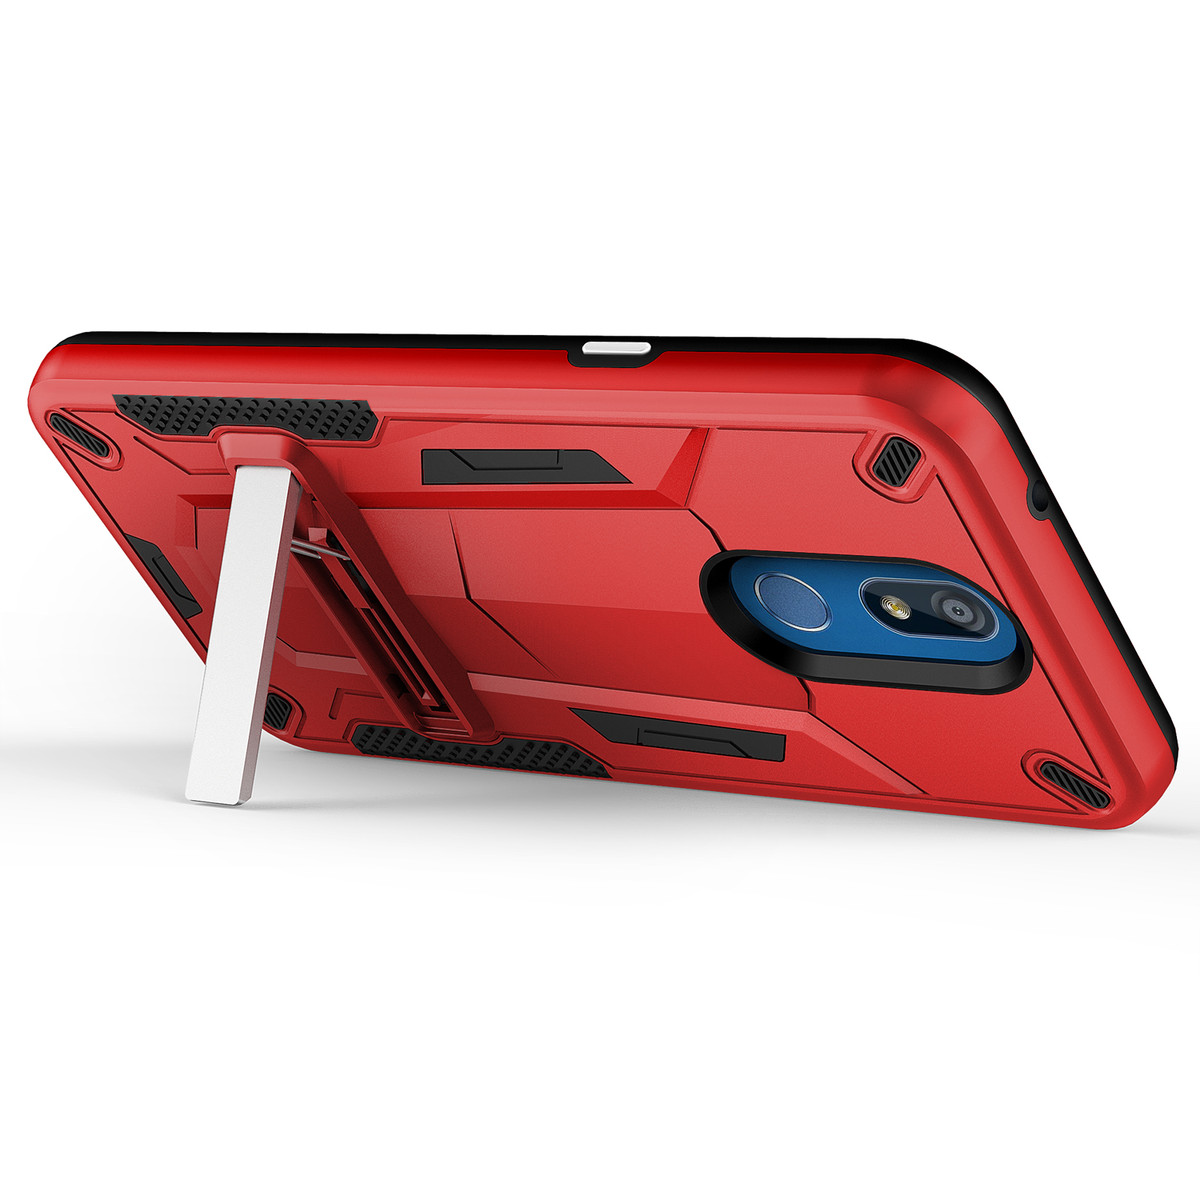 LG K40 / LG Harmony 3 Case - Transm Series by Zizo with Kickstand and UV Coated PC/TPU Layers - Red (4518)